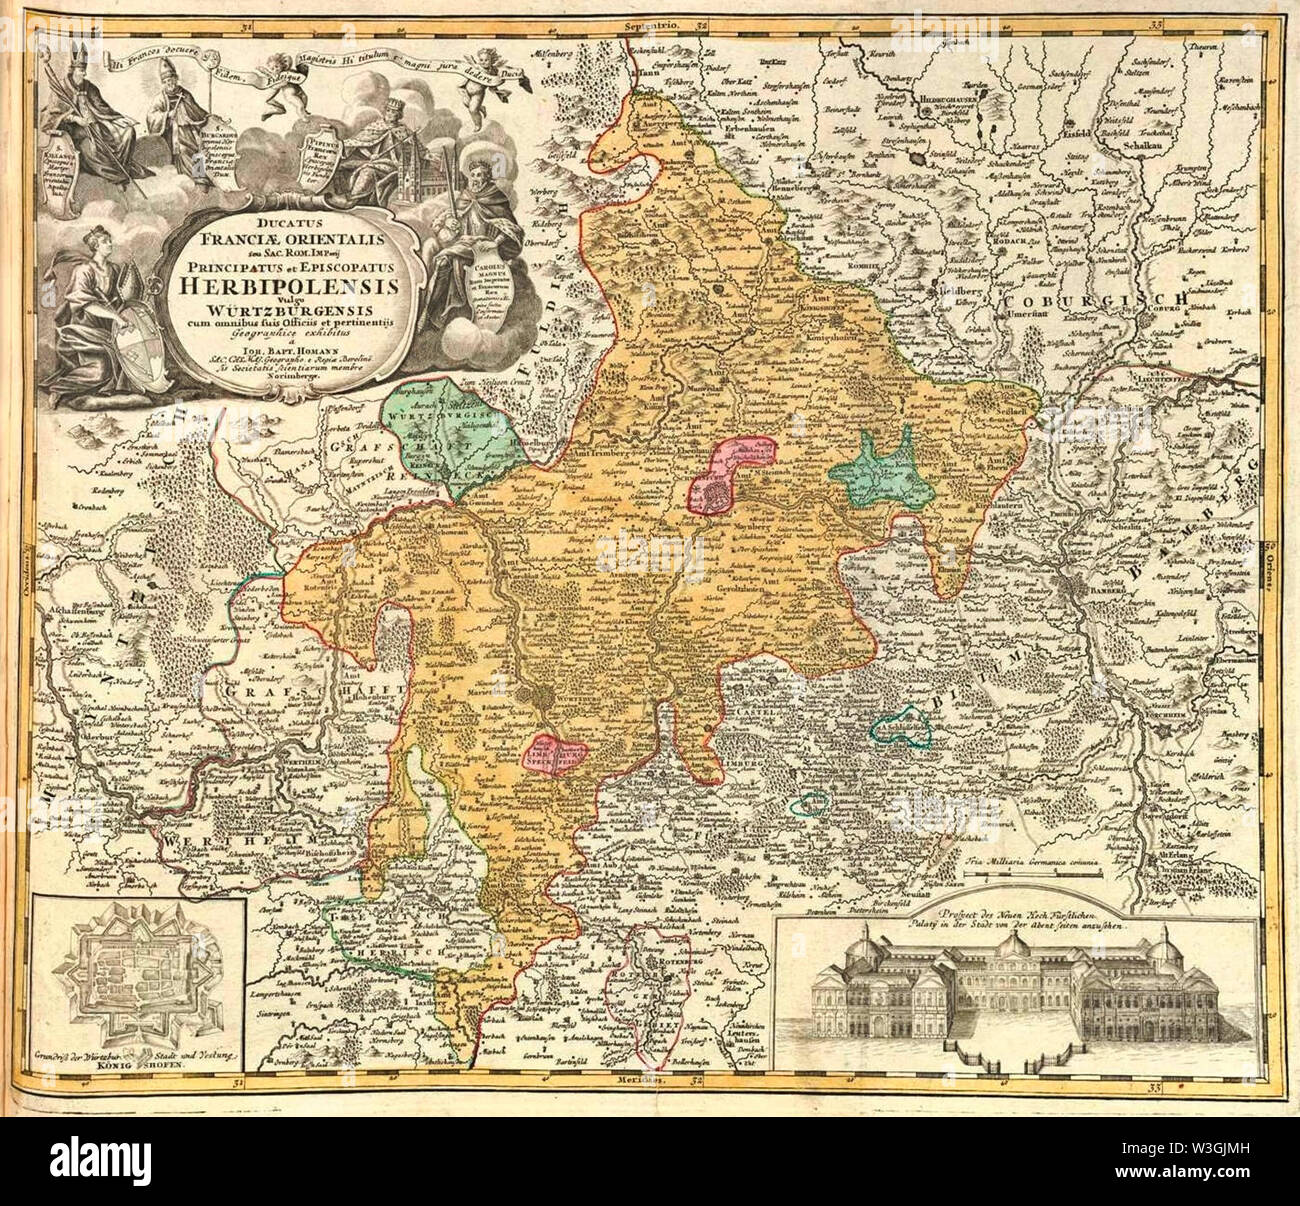 Early 18th century map of the Prince-Bishopric of Würzburg (Latin: Principatus et Episcopatus Herbipolensis) by Johann Baptist Homann. The prince-bishops of Würzburg also bore the title of duke of the Duchy of Franconia (Latin: Ducatus franciae orientalis), which was largely honorific. The red-colored area at the center of the map shows the territory of the Free Imperial City of Sweinfurst. The other area in red is the County of Limpurg–Speckfeld, circa 1720 Stock Photo